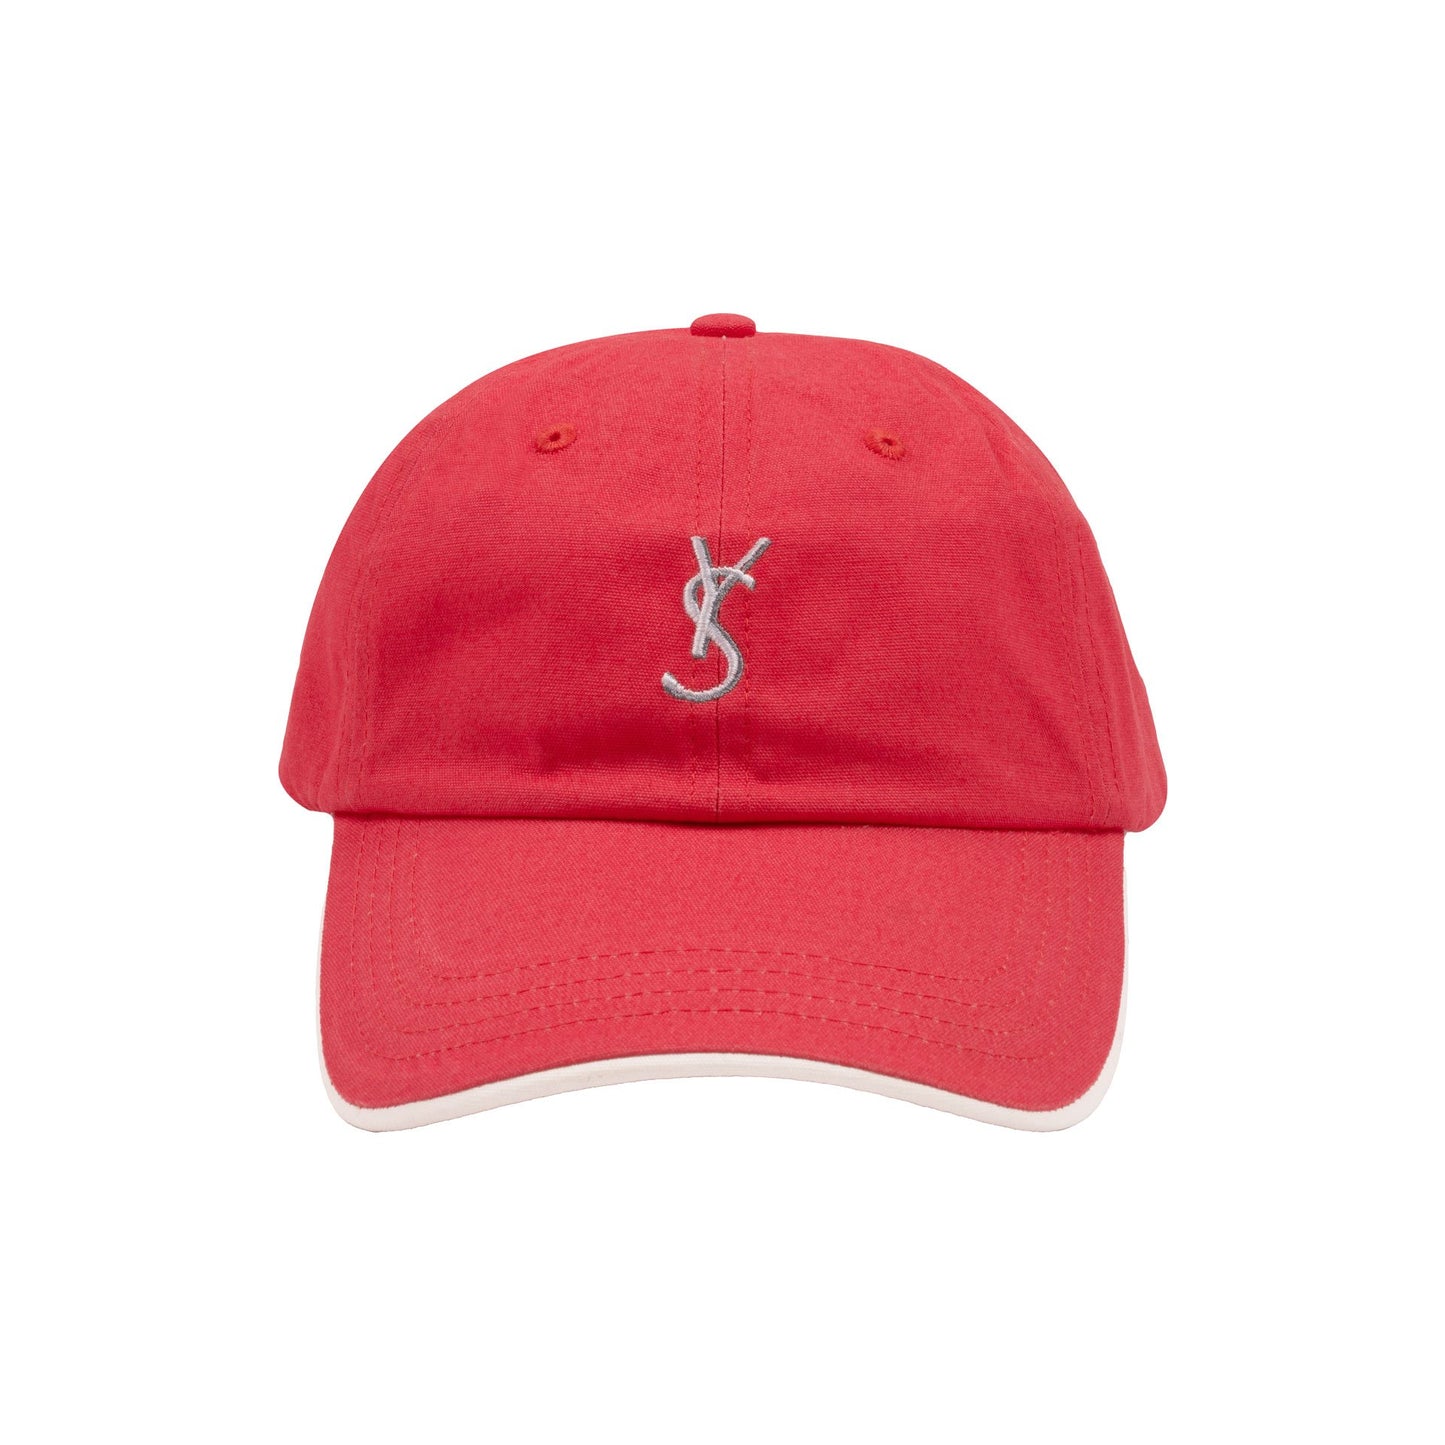 Two Tone Cap (Red/White)